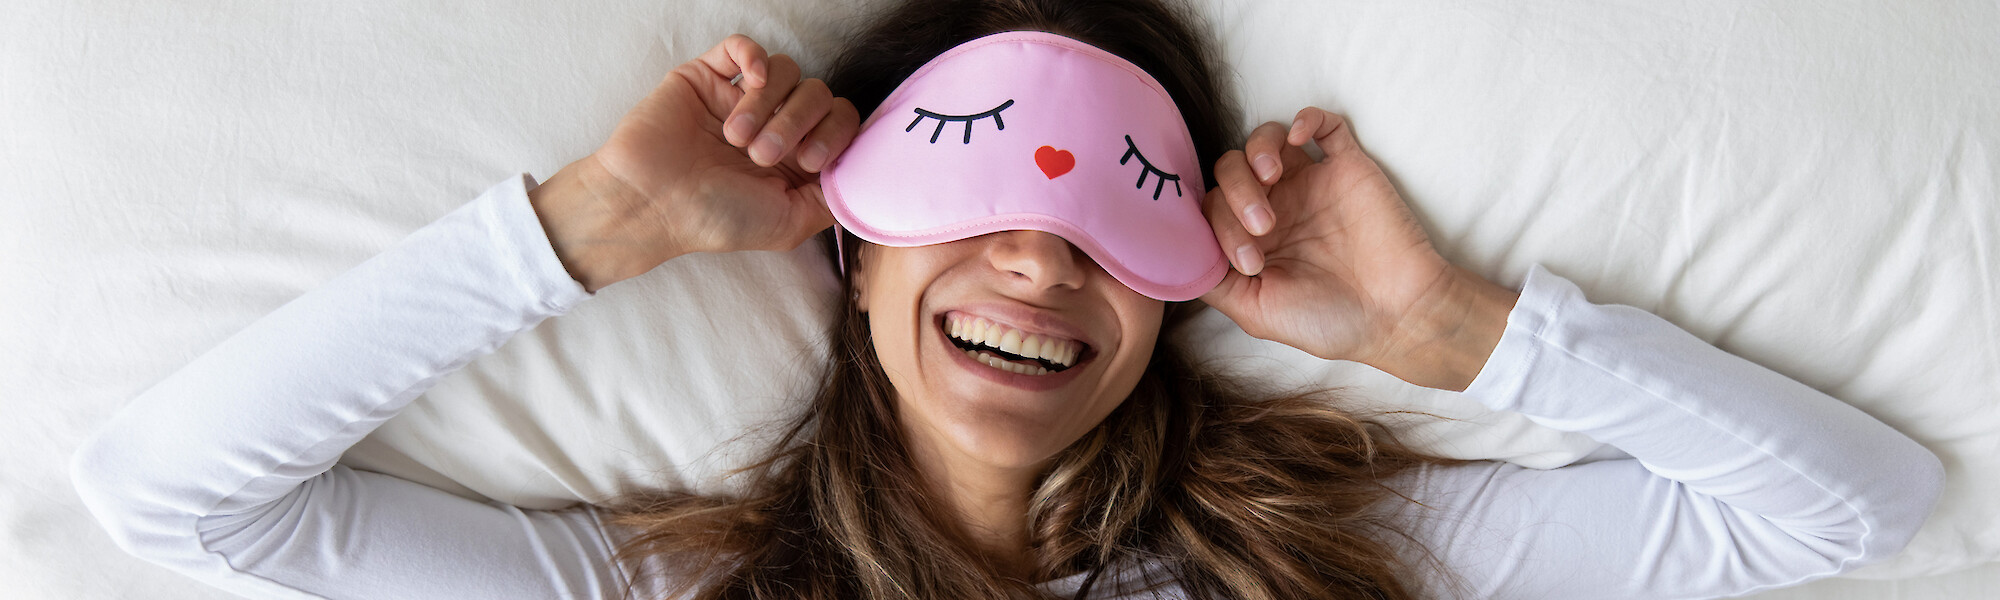 A woman is lying in bed wearing a white shirt and a pink sleep mask, smiling broadly while stretching and holding the mask over her eyes.